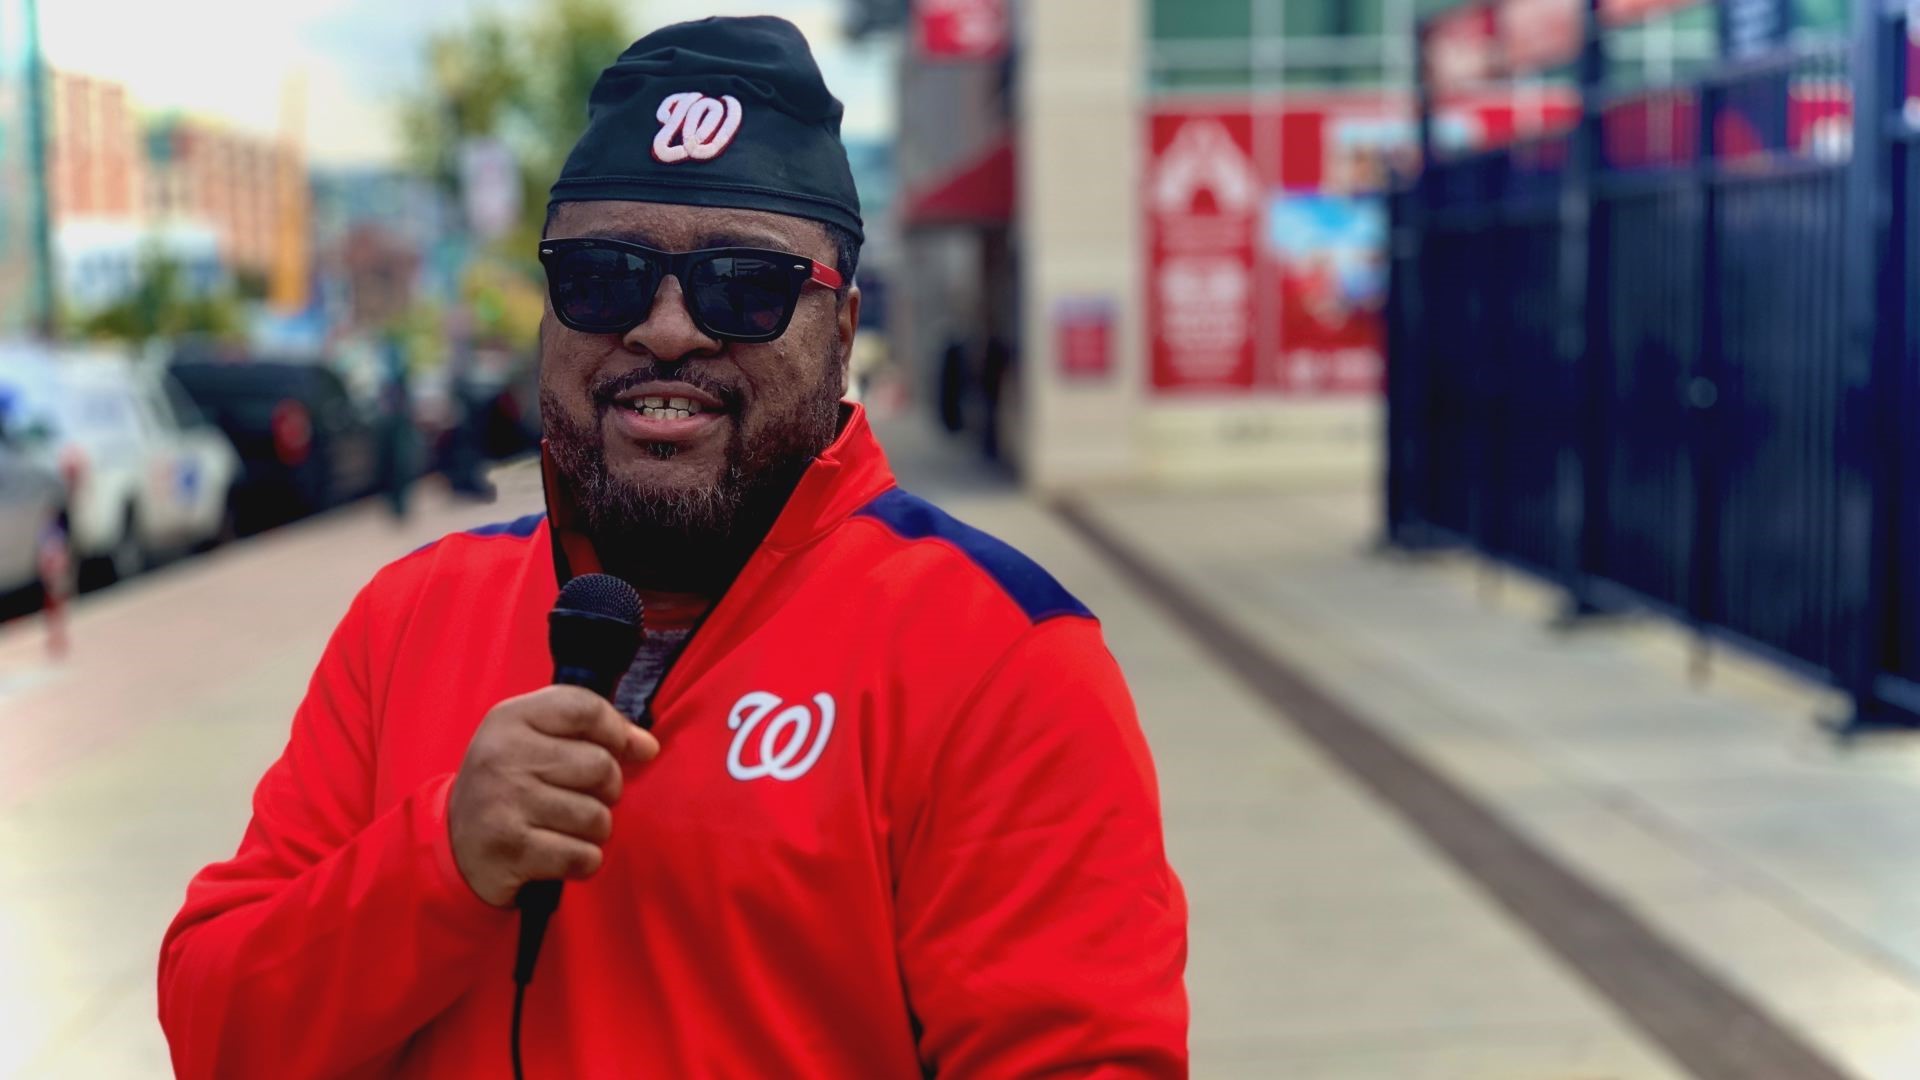 The musician created a song to cheer on the Nationals on their road to becoming the National League champions.